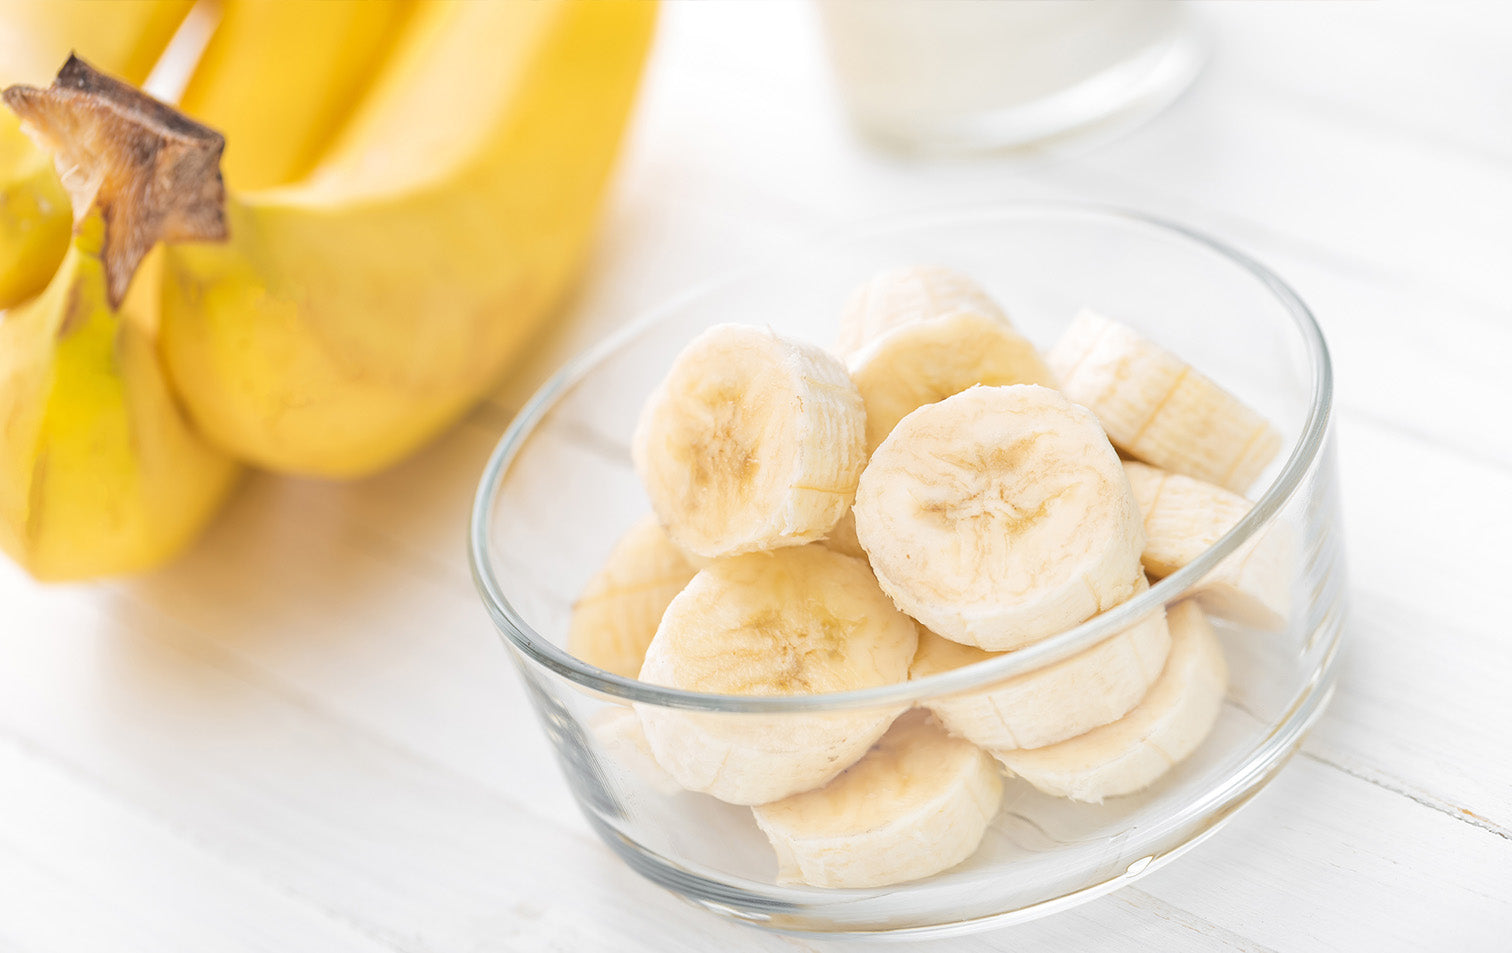 Banana Face Mask Benefits for the Skin and How to Try It